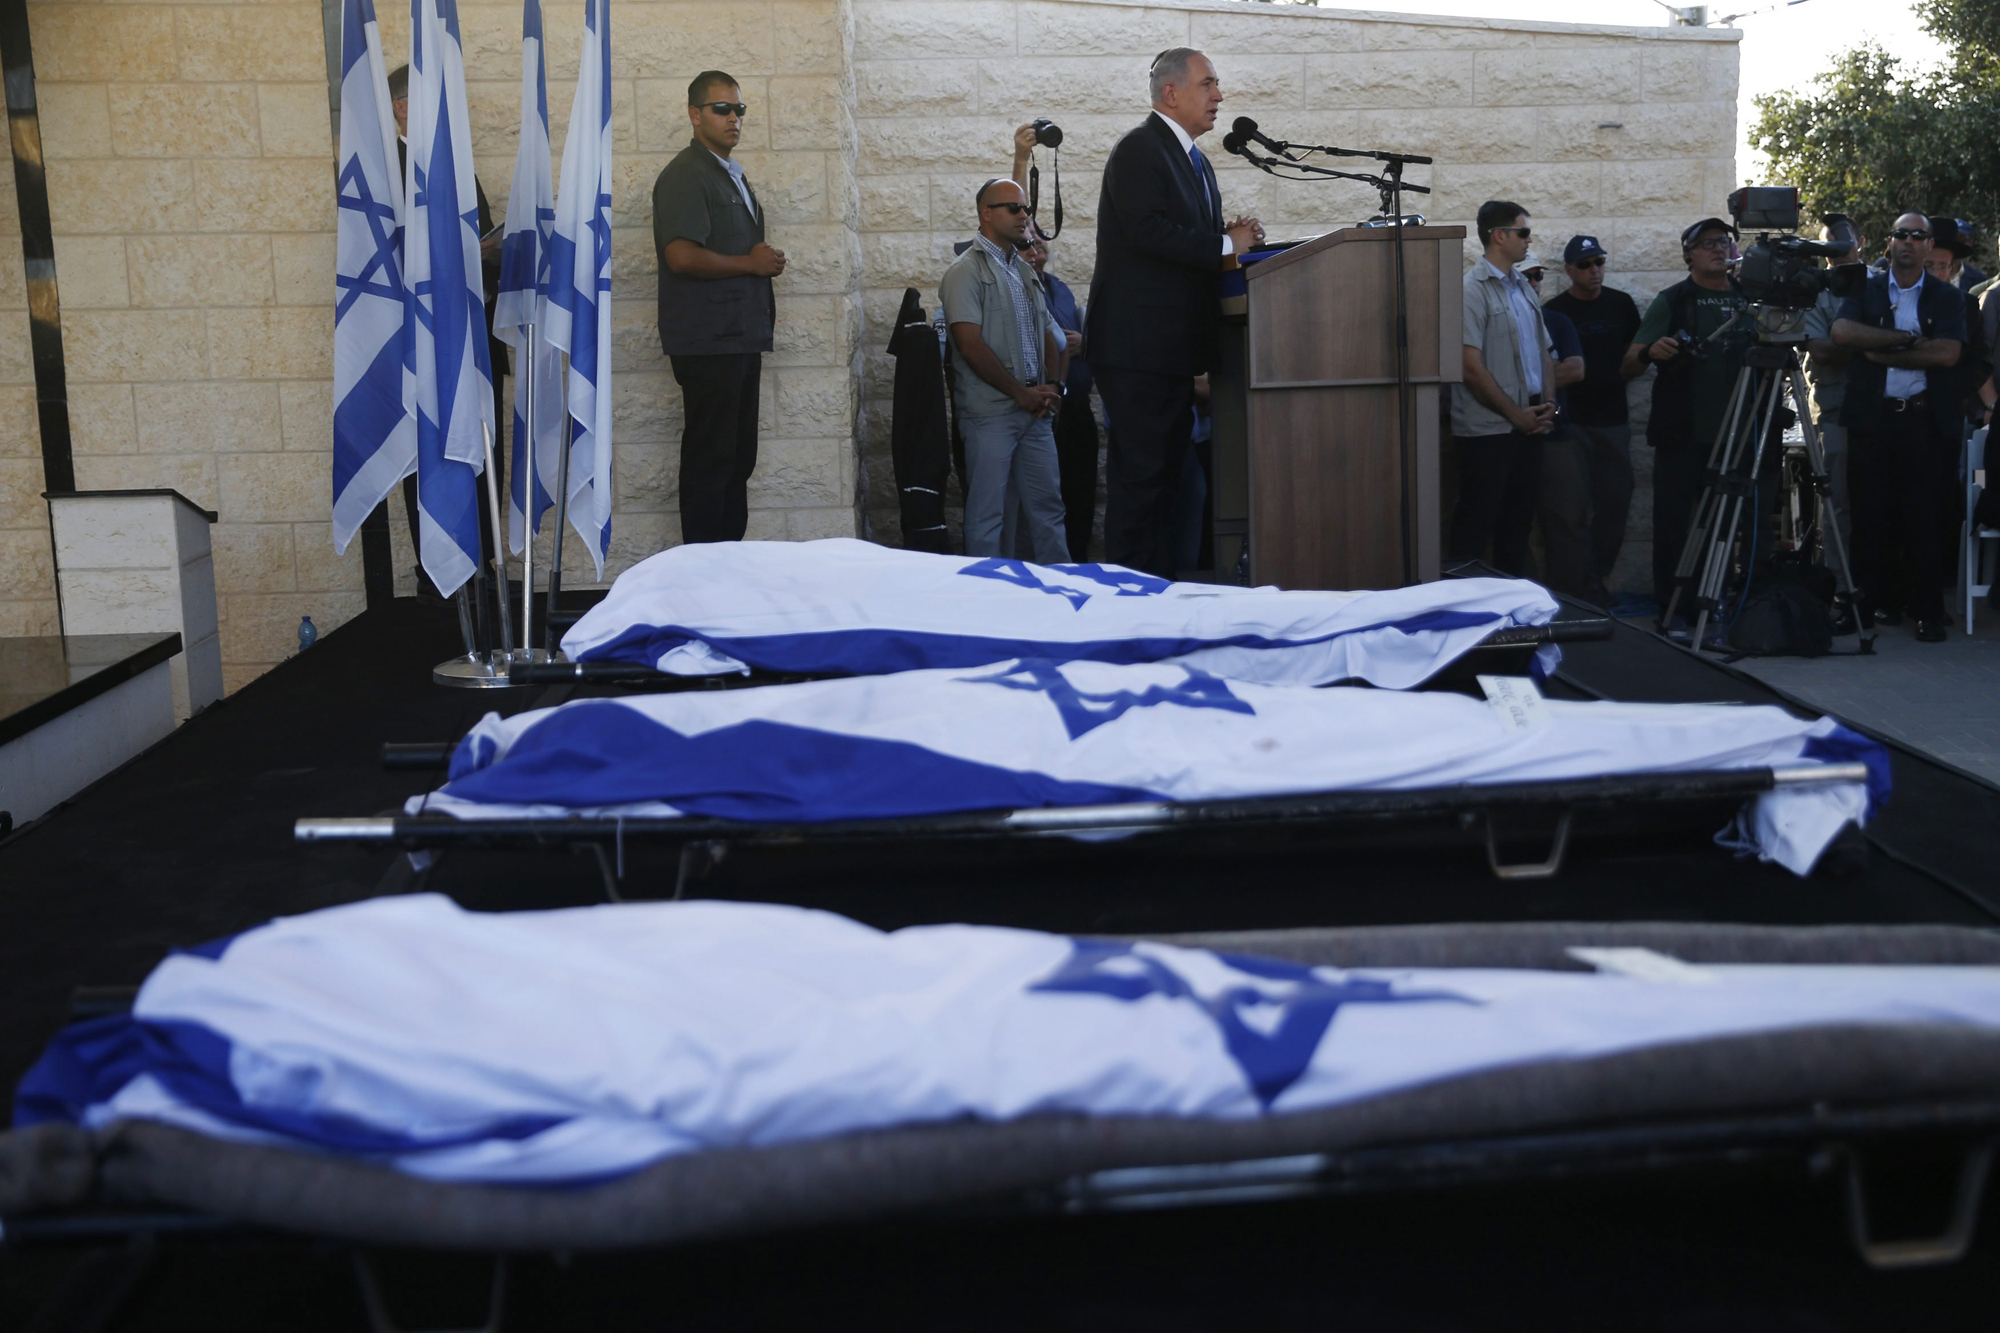 Israeli Prime Minister Benjamin Netanyahu eulogizes three Israeli teens who were abducted and killed in the occupied West Bank, Gil-Ad Shaer, US-Israeli national Naftali Fraenkel, both 16, and Eyal Yifrah, 19, during their joint funeral in the Israeli city of Modi'in, July 1.